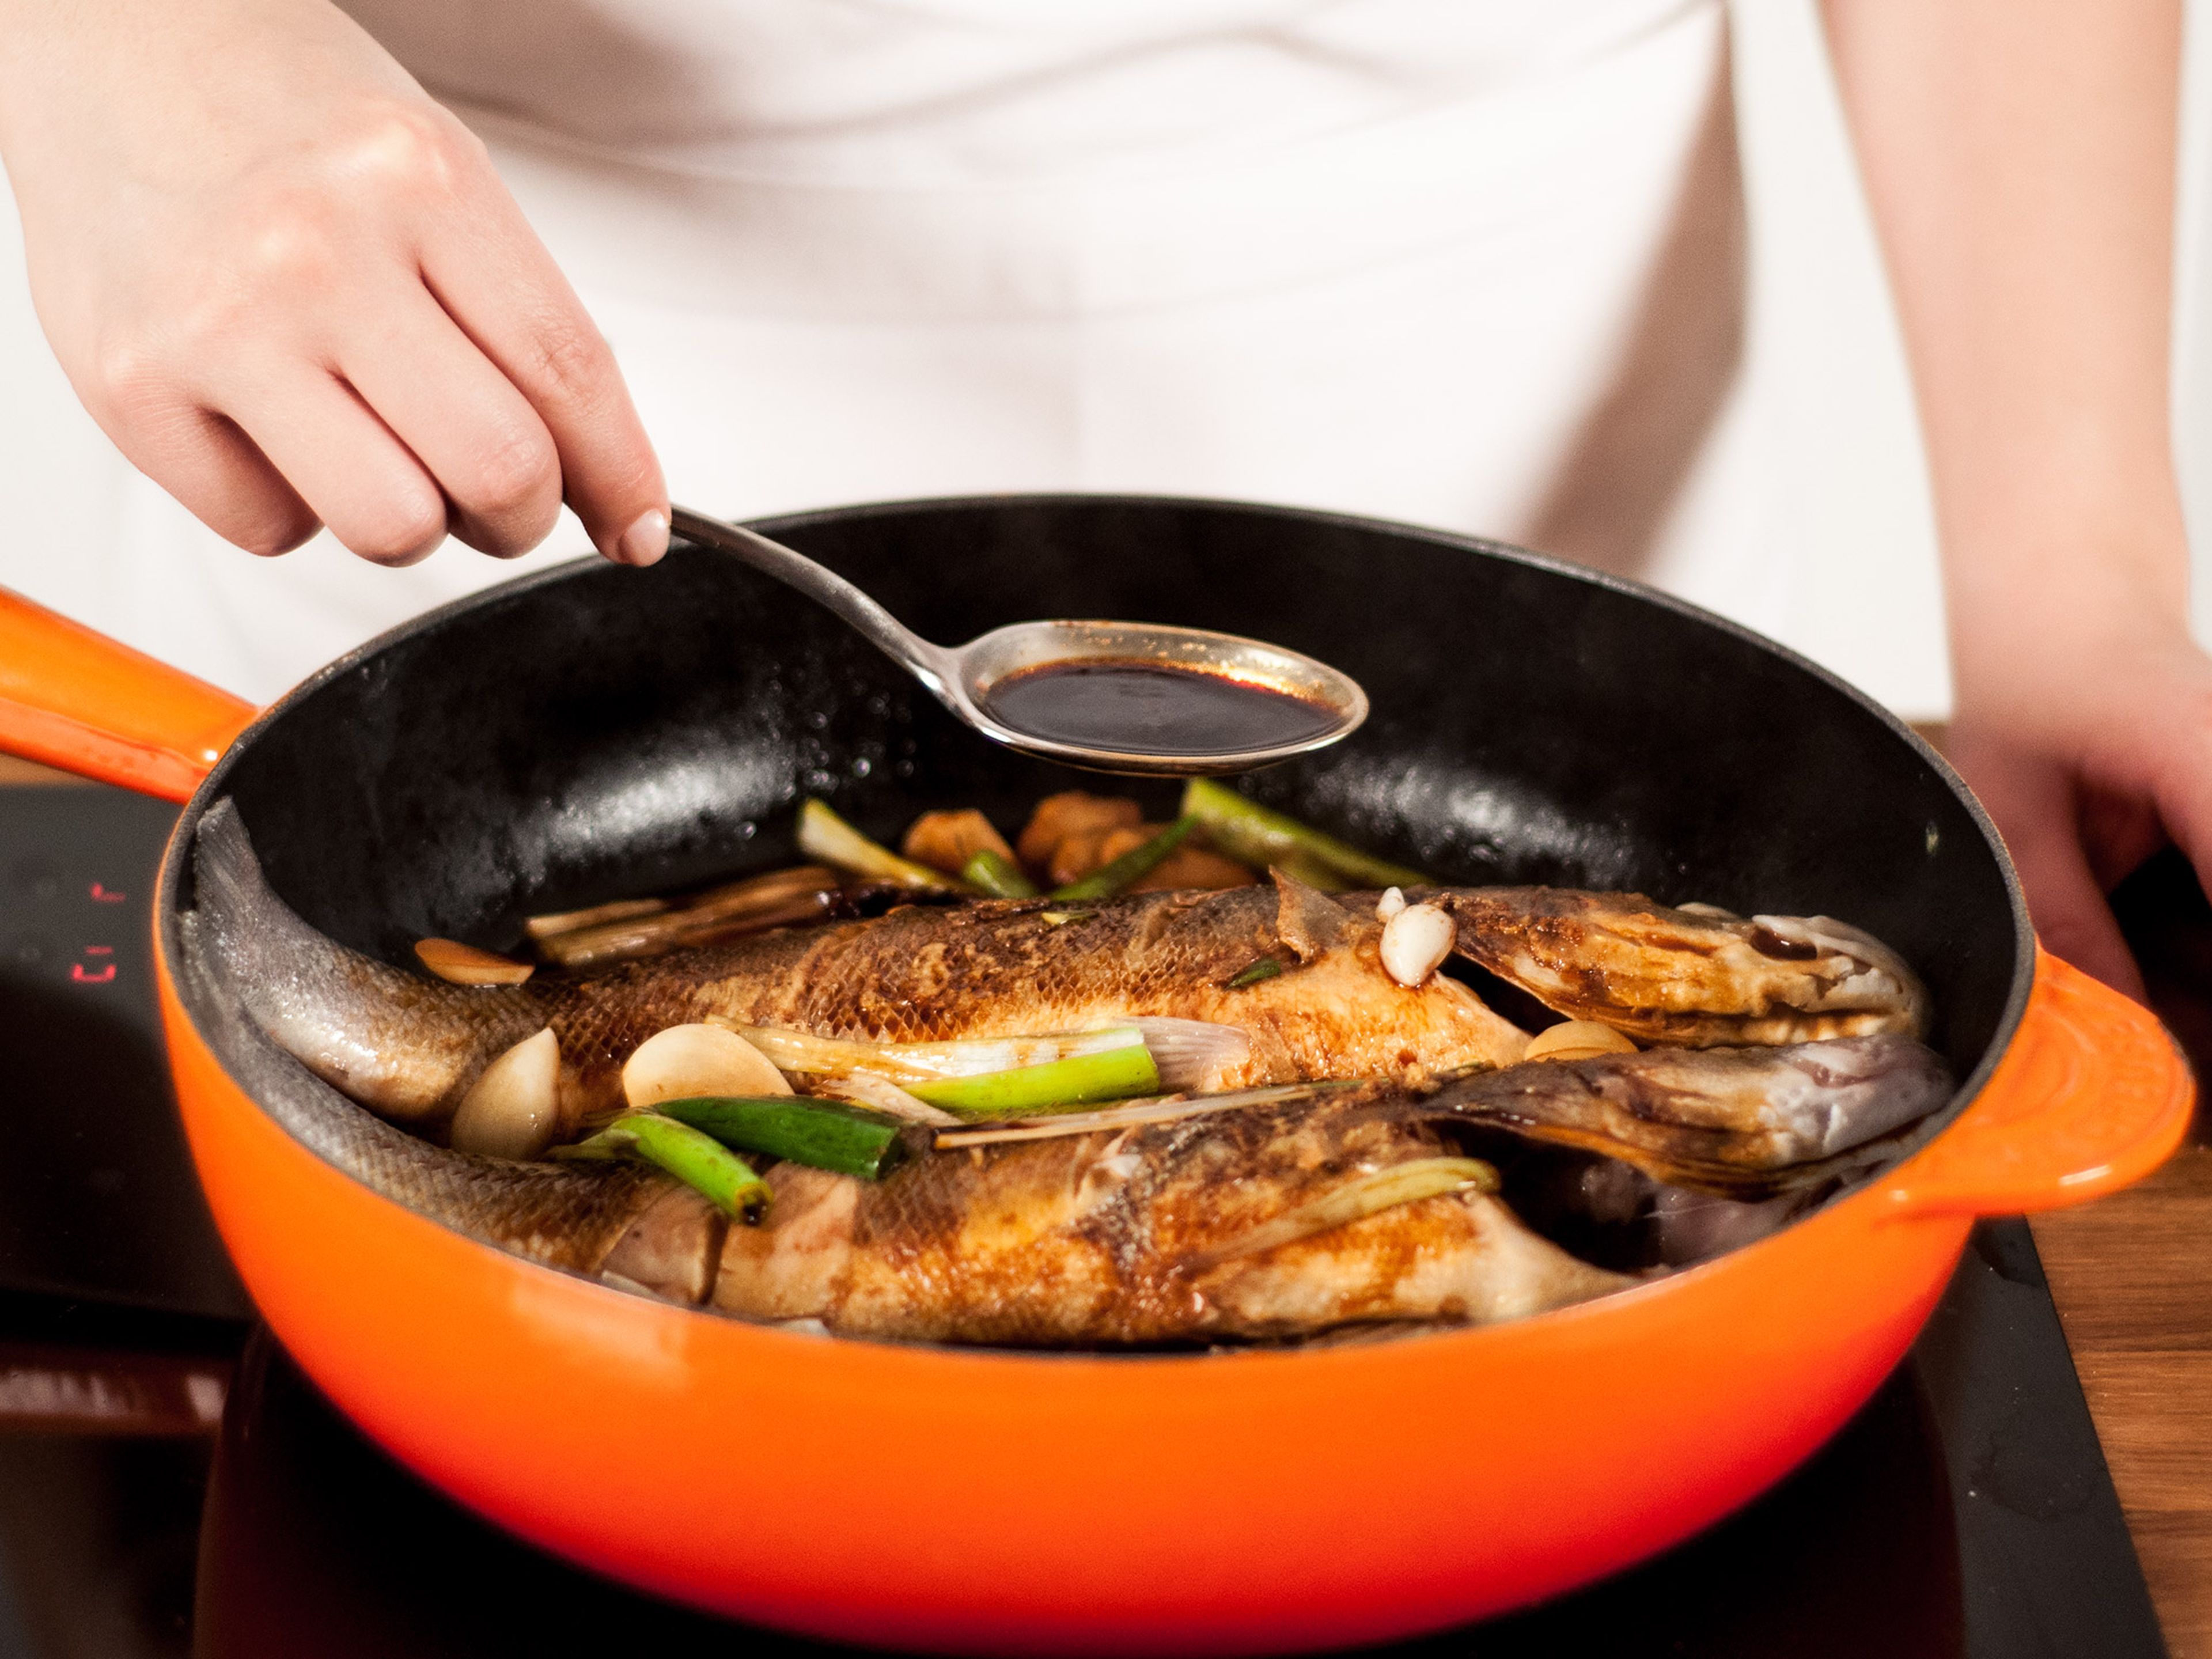 Add water to the pan. Using a spoon, cover the fish with sauce. Cover pan with a lid and allow to simmer on medium-low heat for approx. 20 – 23 min.